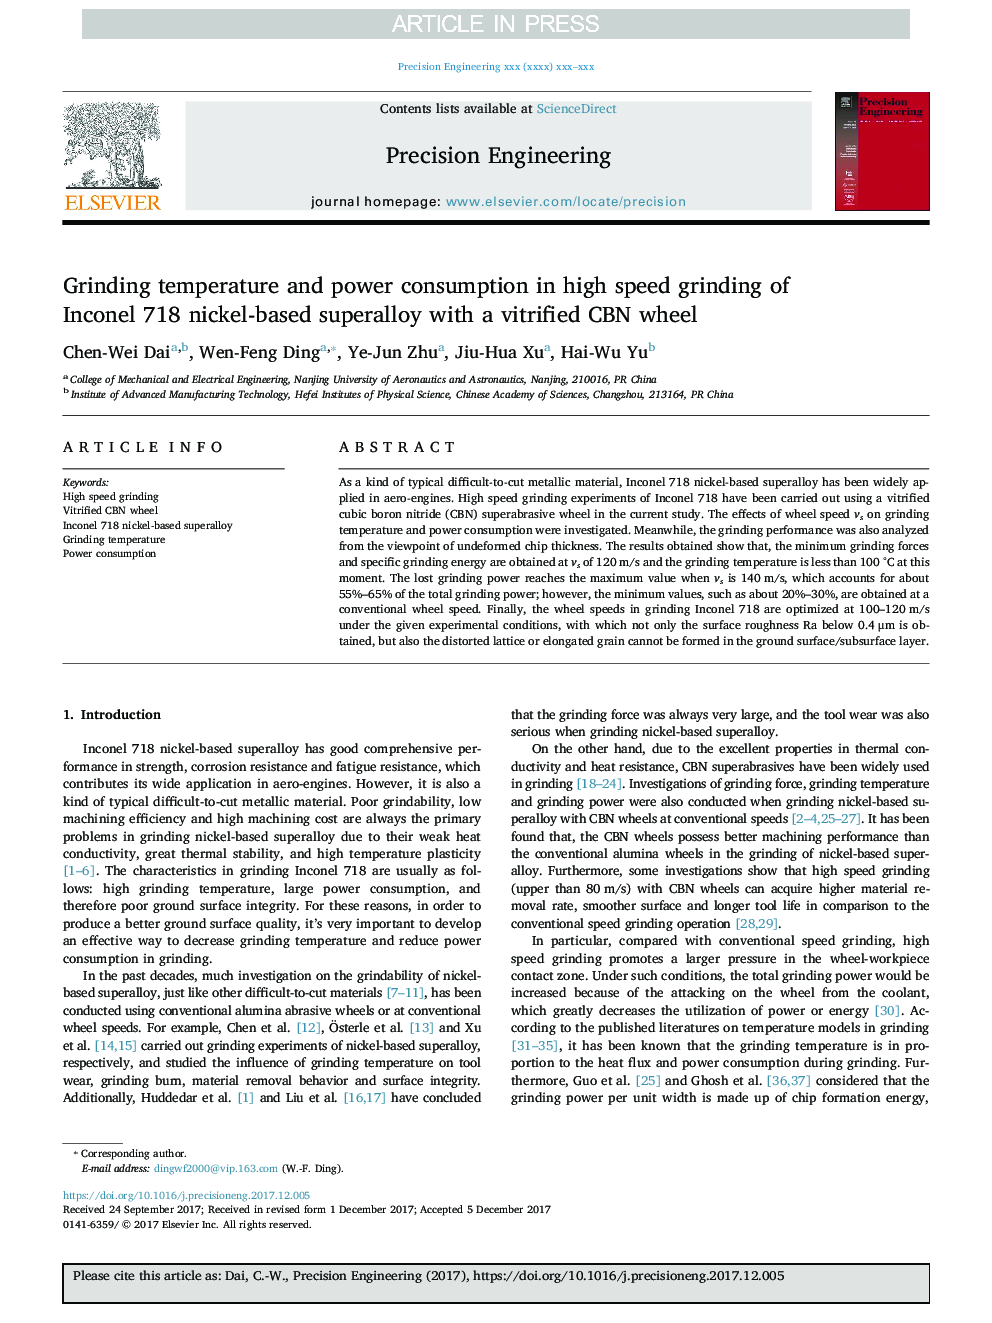 Grinding temperature and power consumption in high speed grinding of Inconel 718 nickel-based superalloy with a vitrified CBN wheel